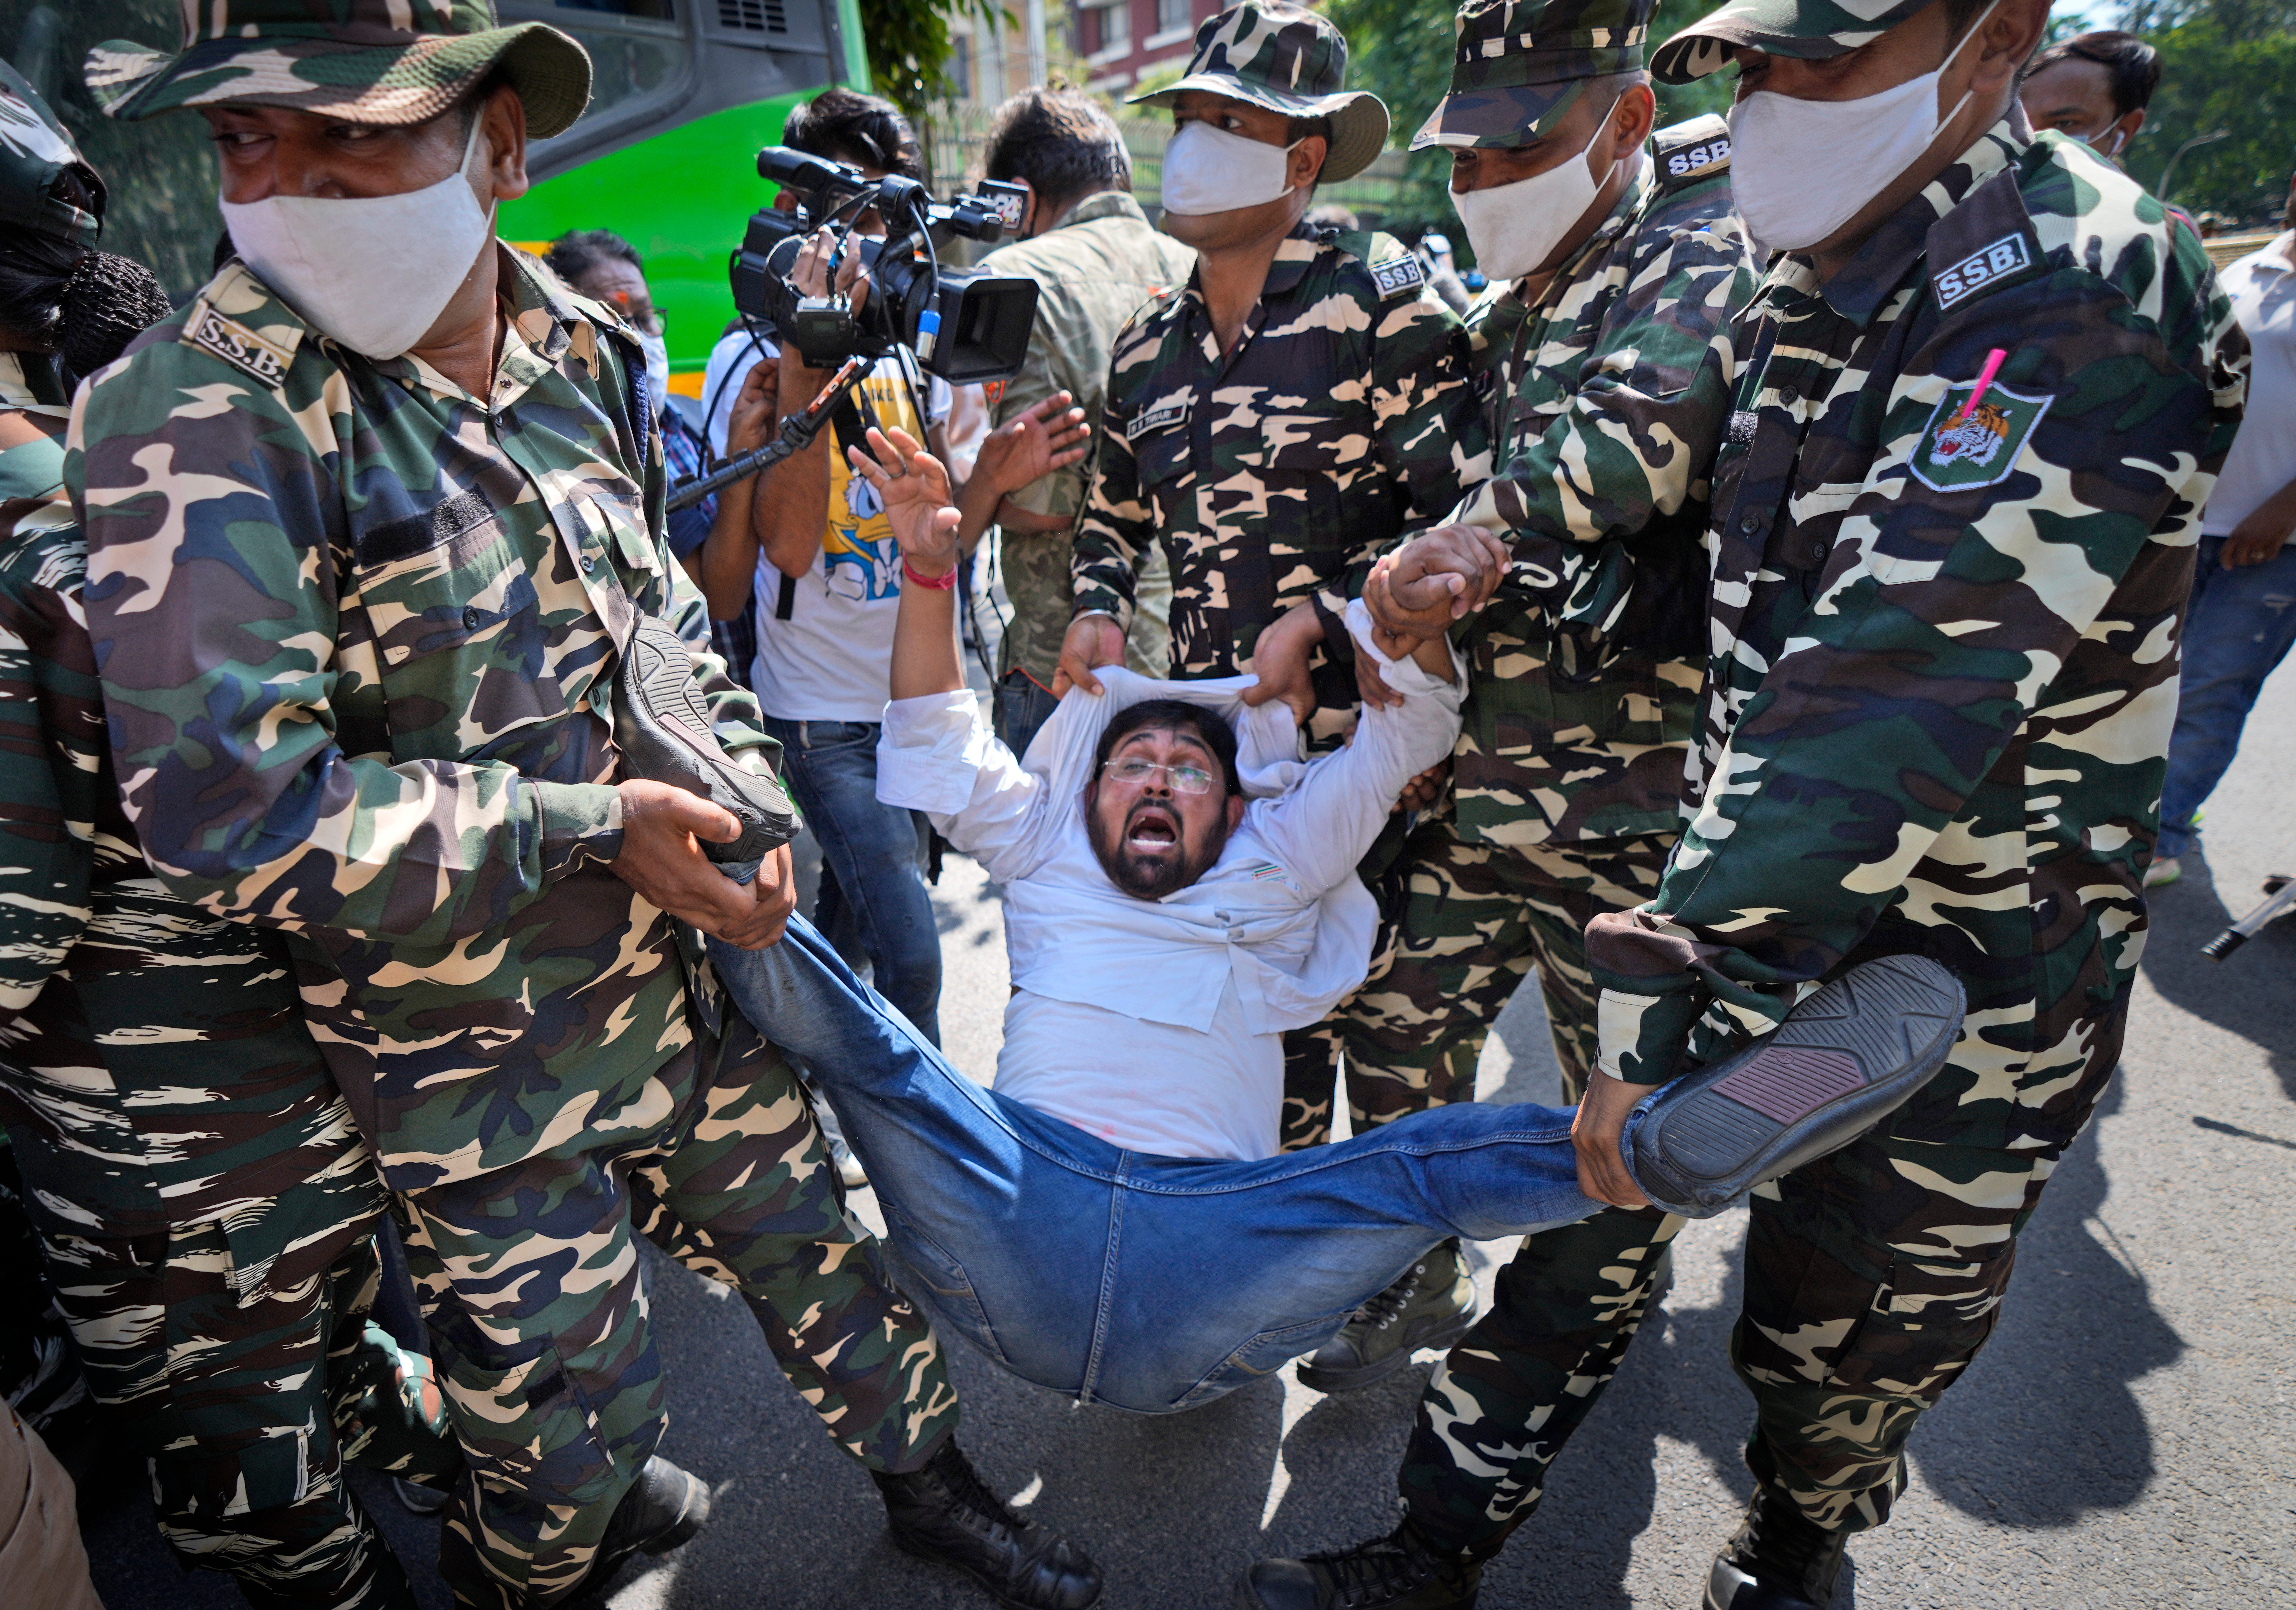 Paramilitary force soldiers detain an activist of Congress party's youth wing protesting against Sunday's killing of four farmers in Uttar Pradesh state after being run over by a car